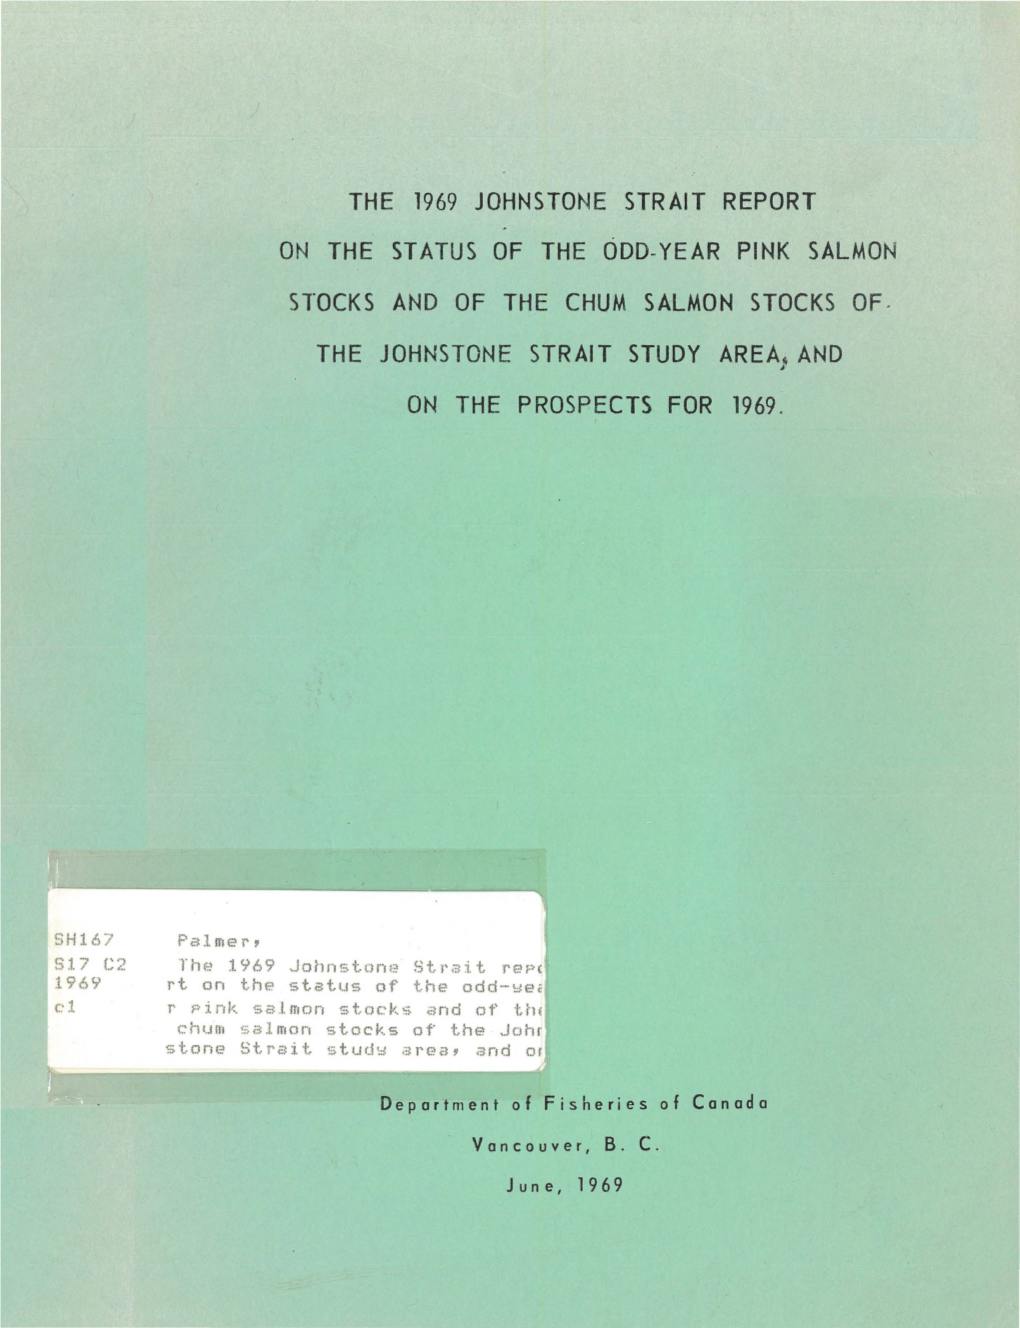 The 1969 Johnstone Strait Report on the Status of the Odd-Year Pink Salmon Stocks and of the Chum Salmon Stocks Of